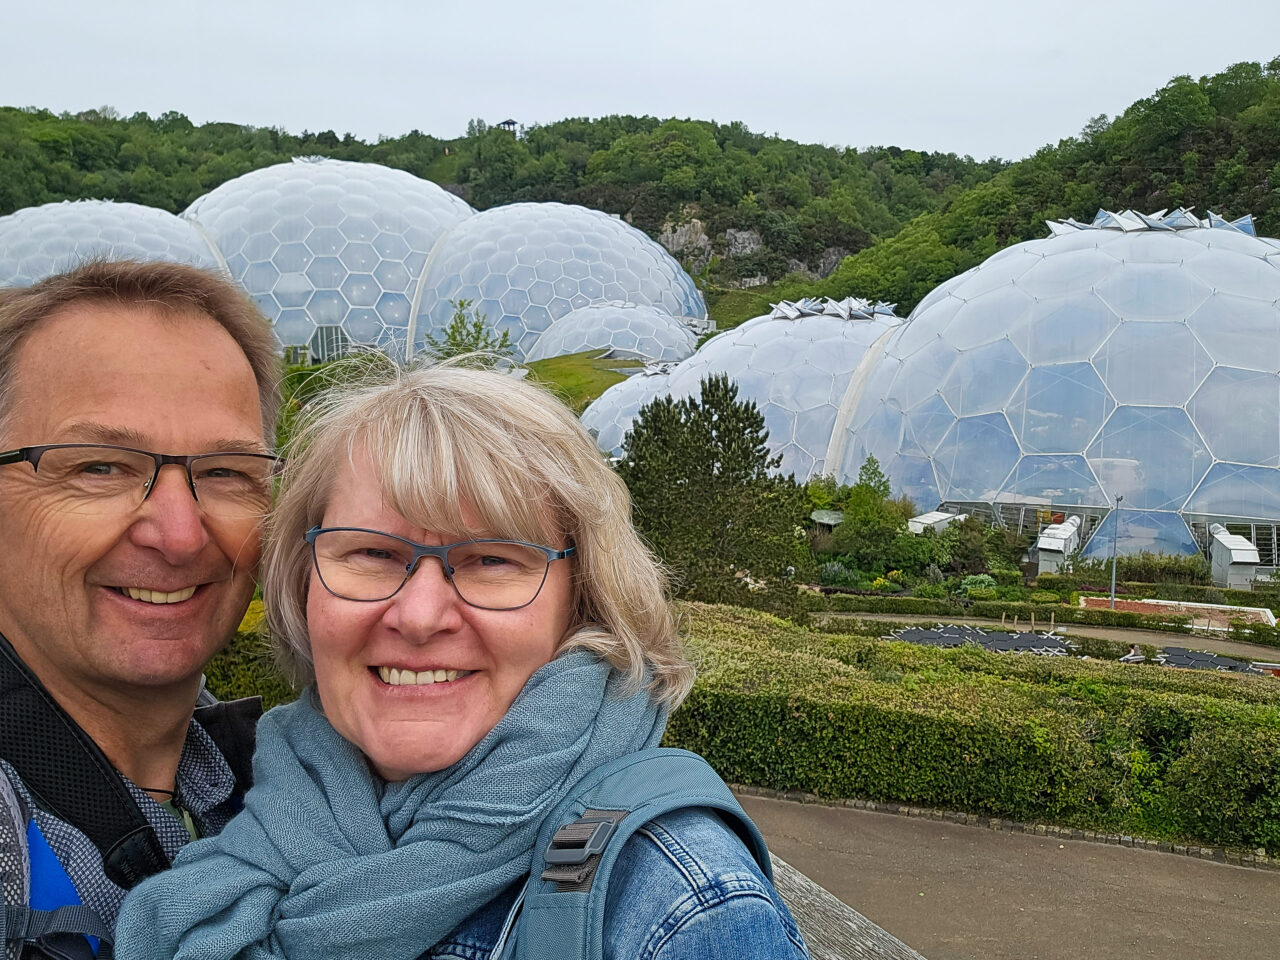 2023-05-23_11-12-42_Cornwall - Eden Project_20230523_111242-3840